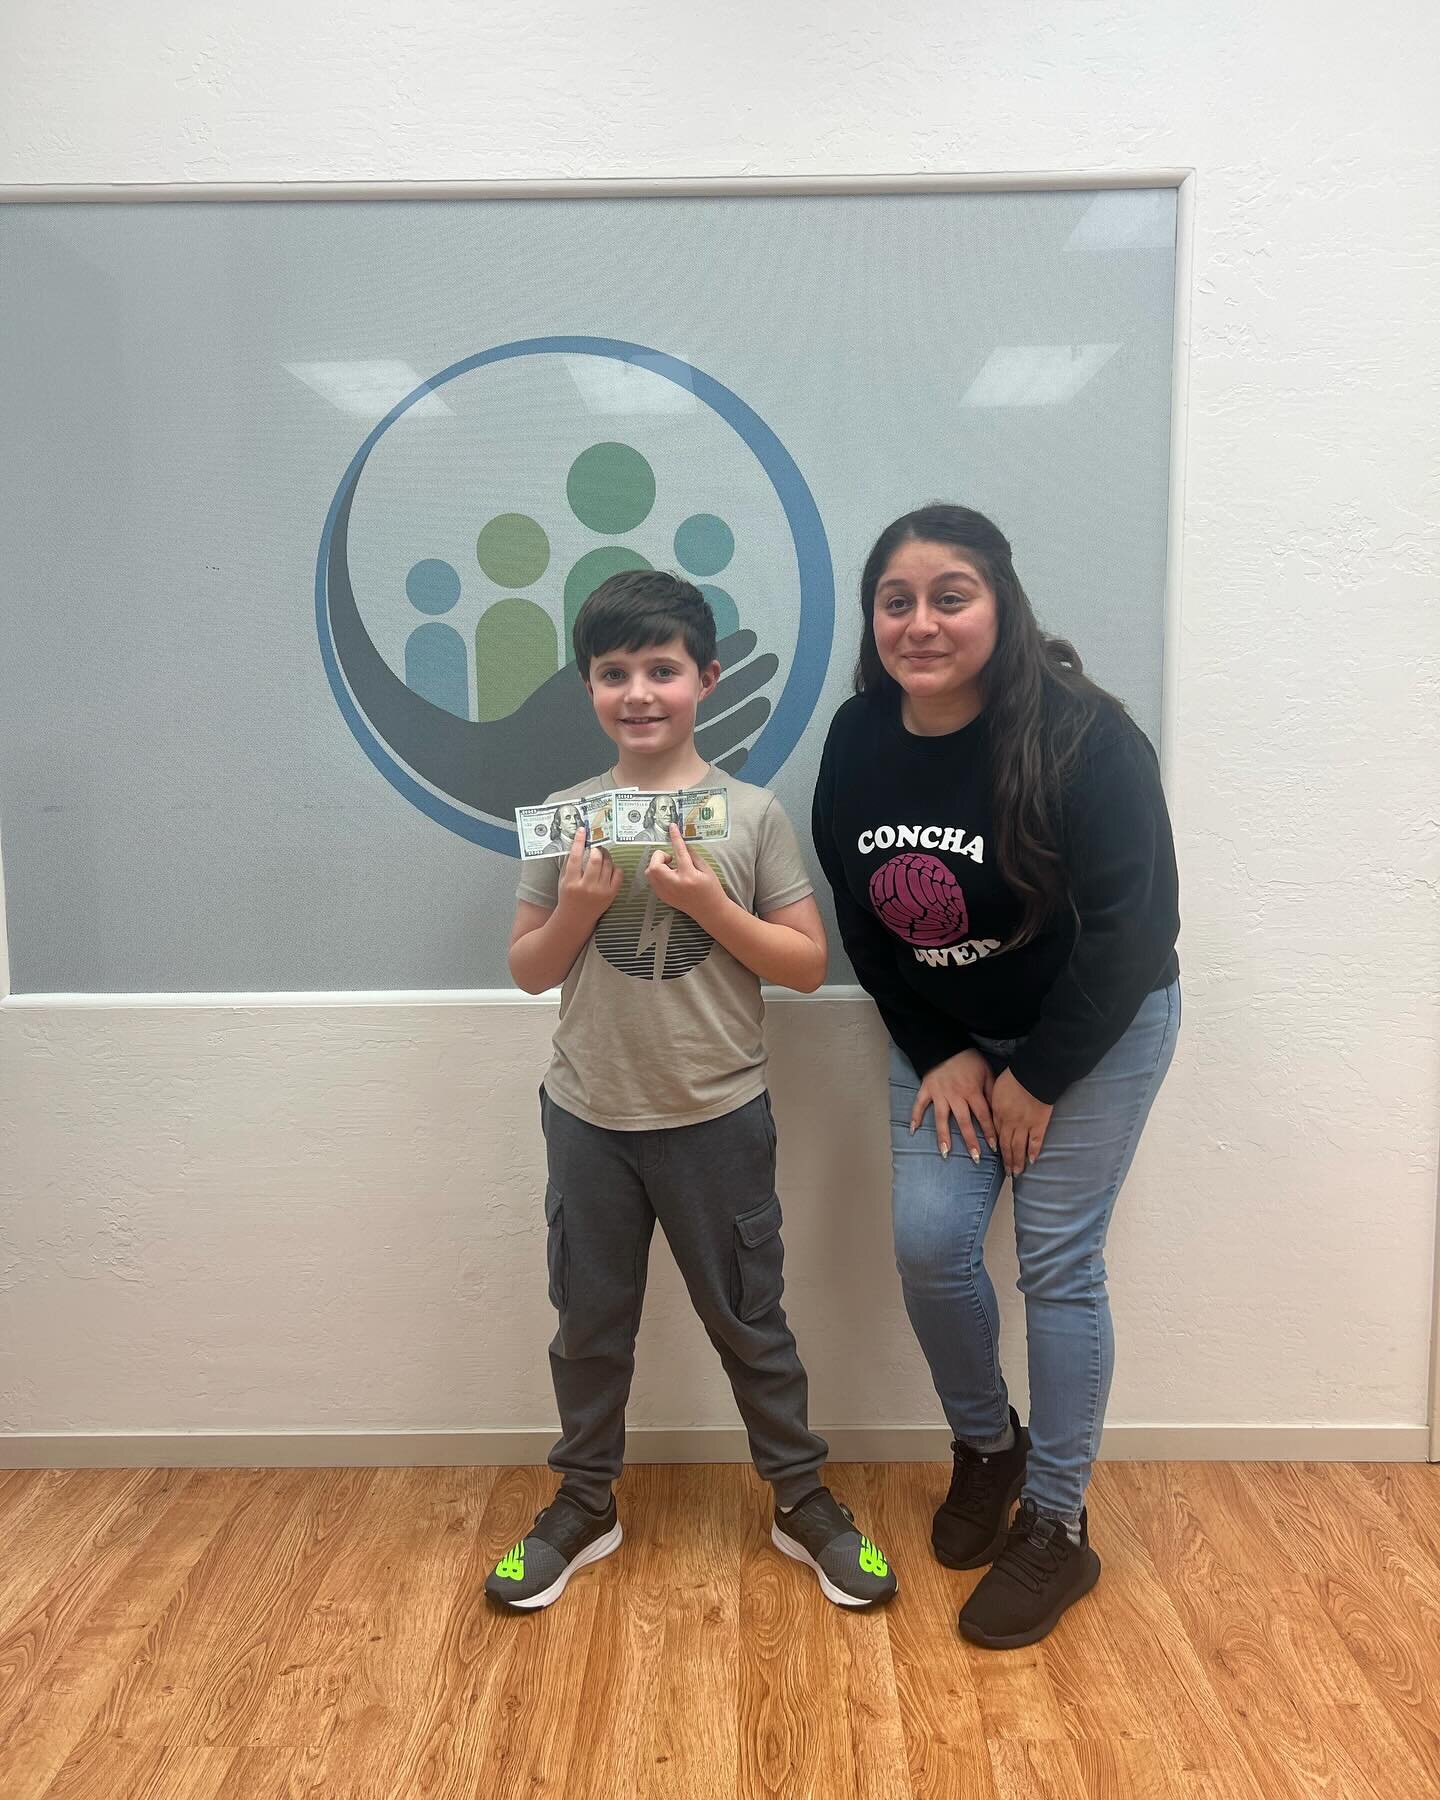 Logan came by our office last week and dropped off a donation of his own money to AAF.  With his encouragement he also got his family to match his donation. Thank you Logan for supporting Marin families!